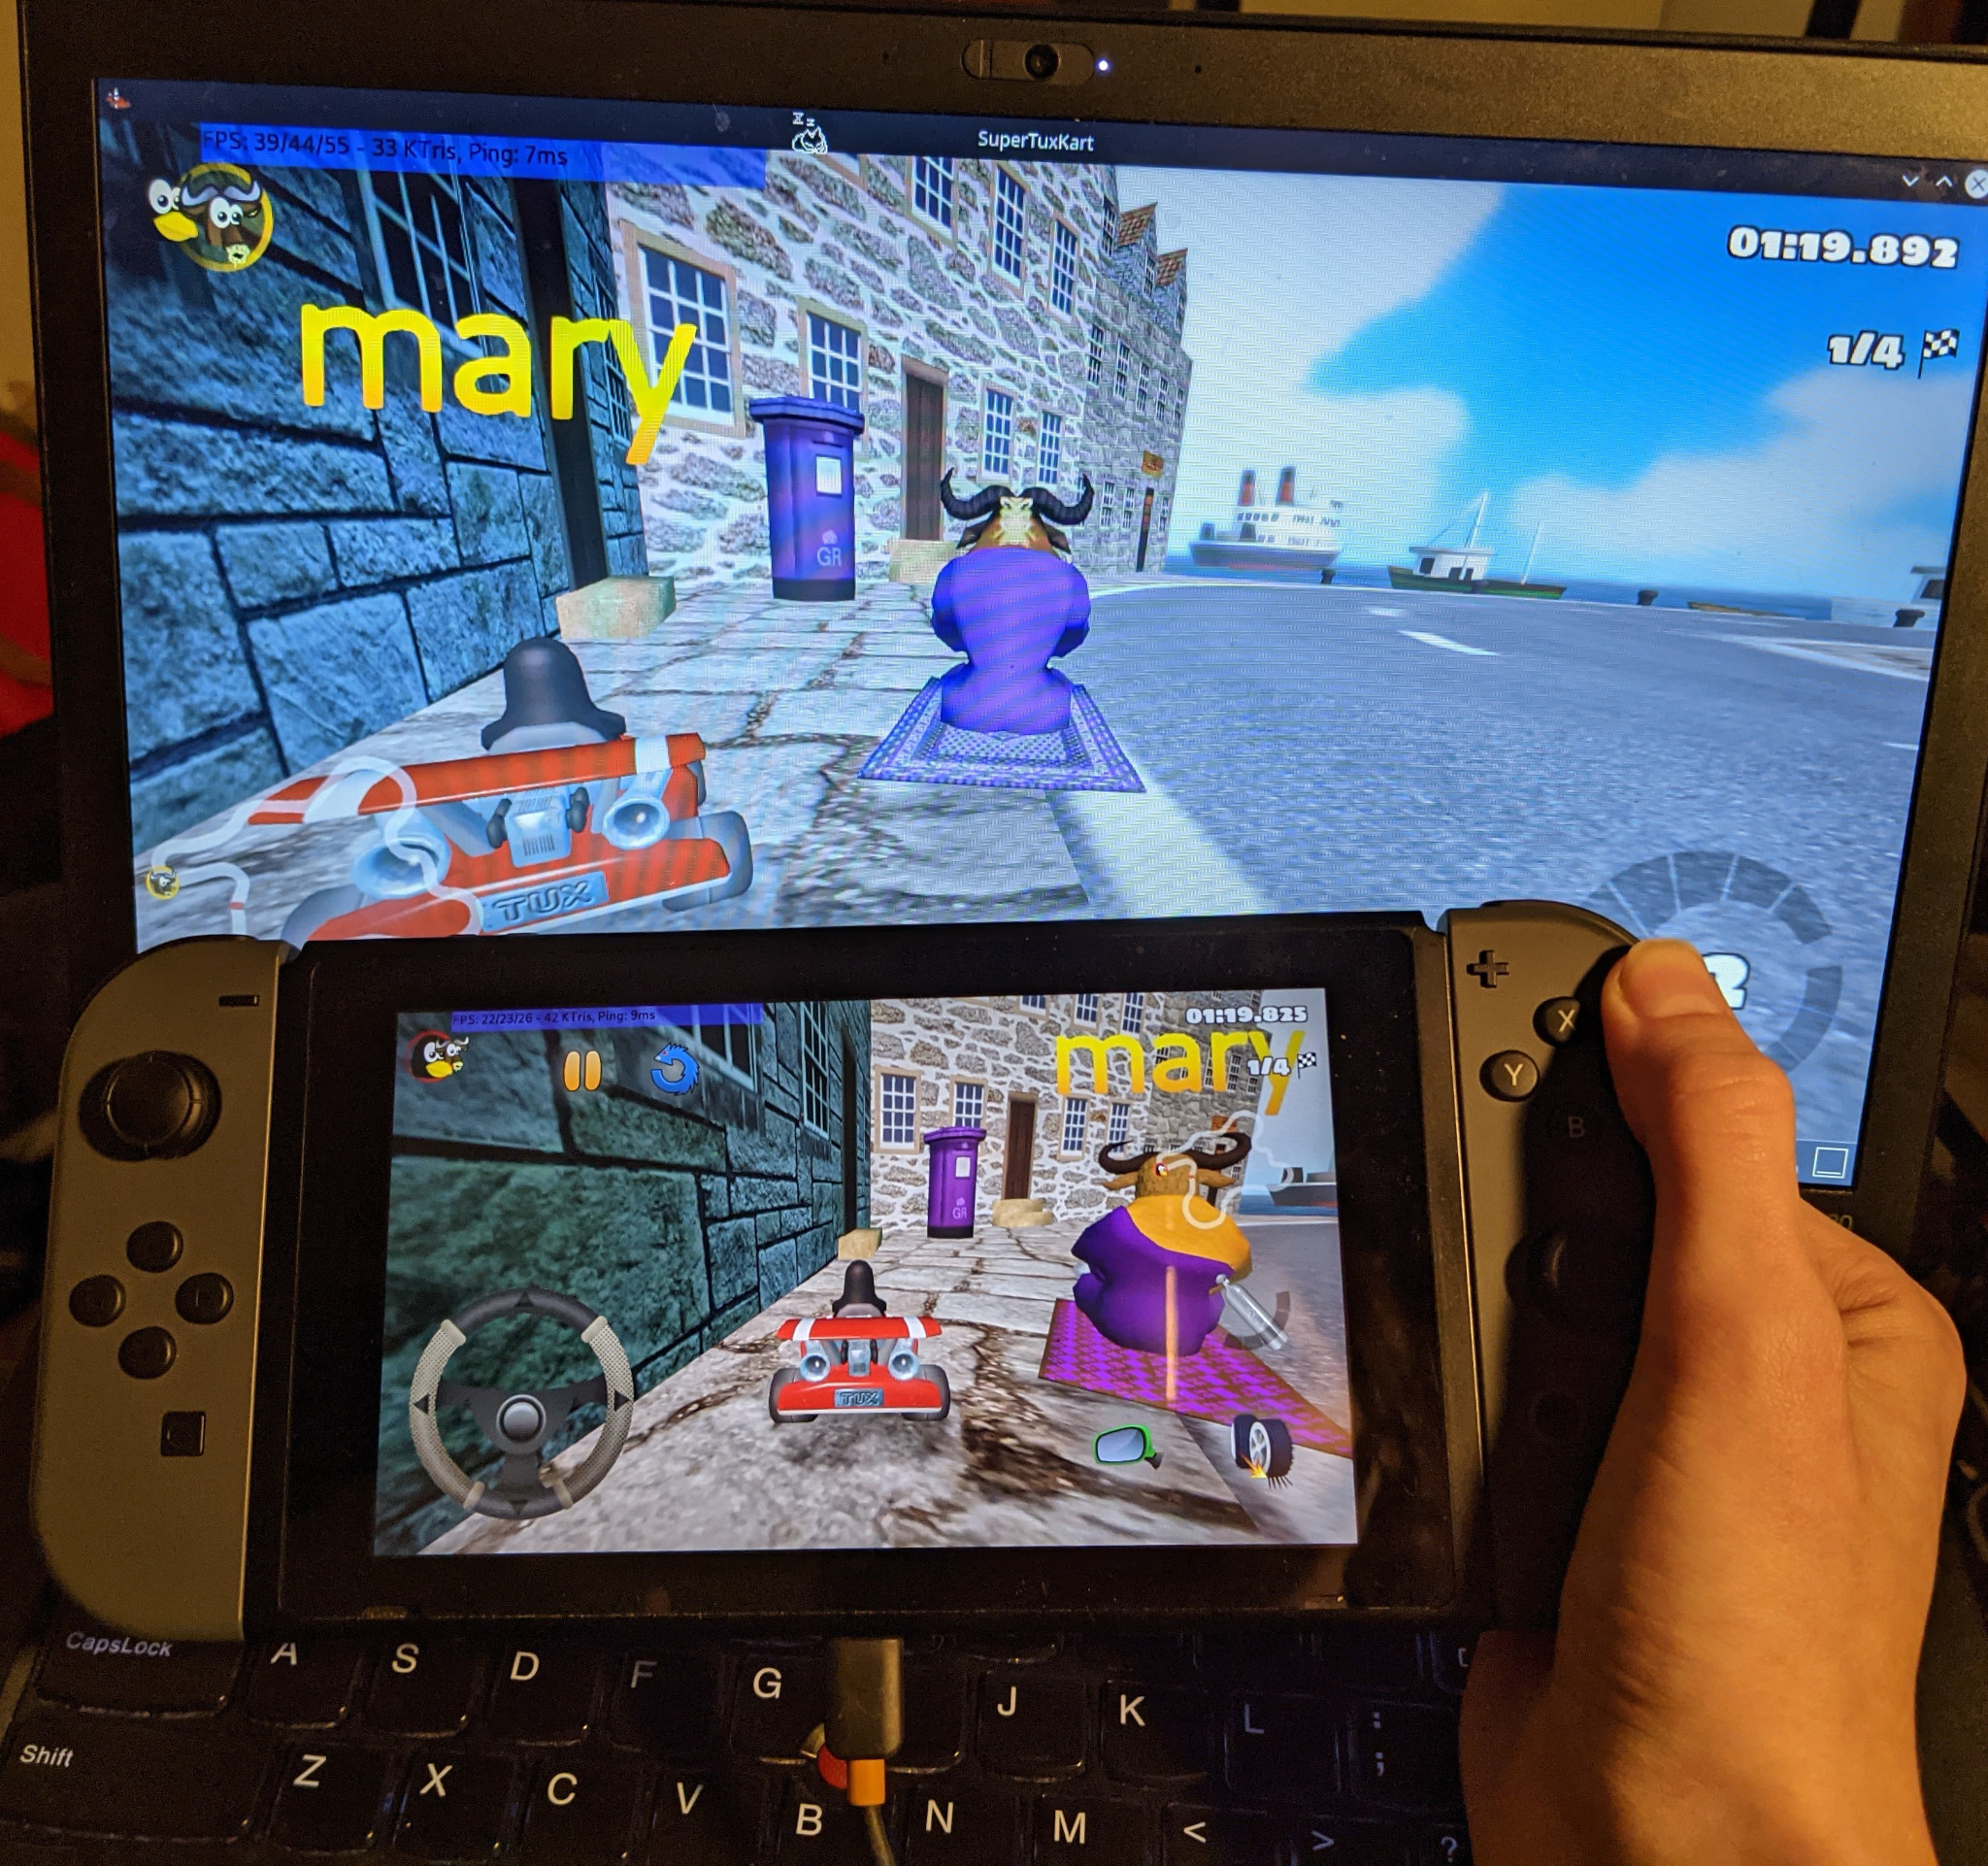 SuperTuxKart being played in a multiplayer game on a Nintendo Switch and a laptop